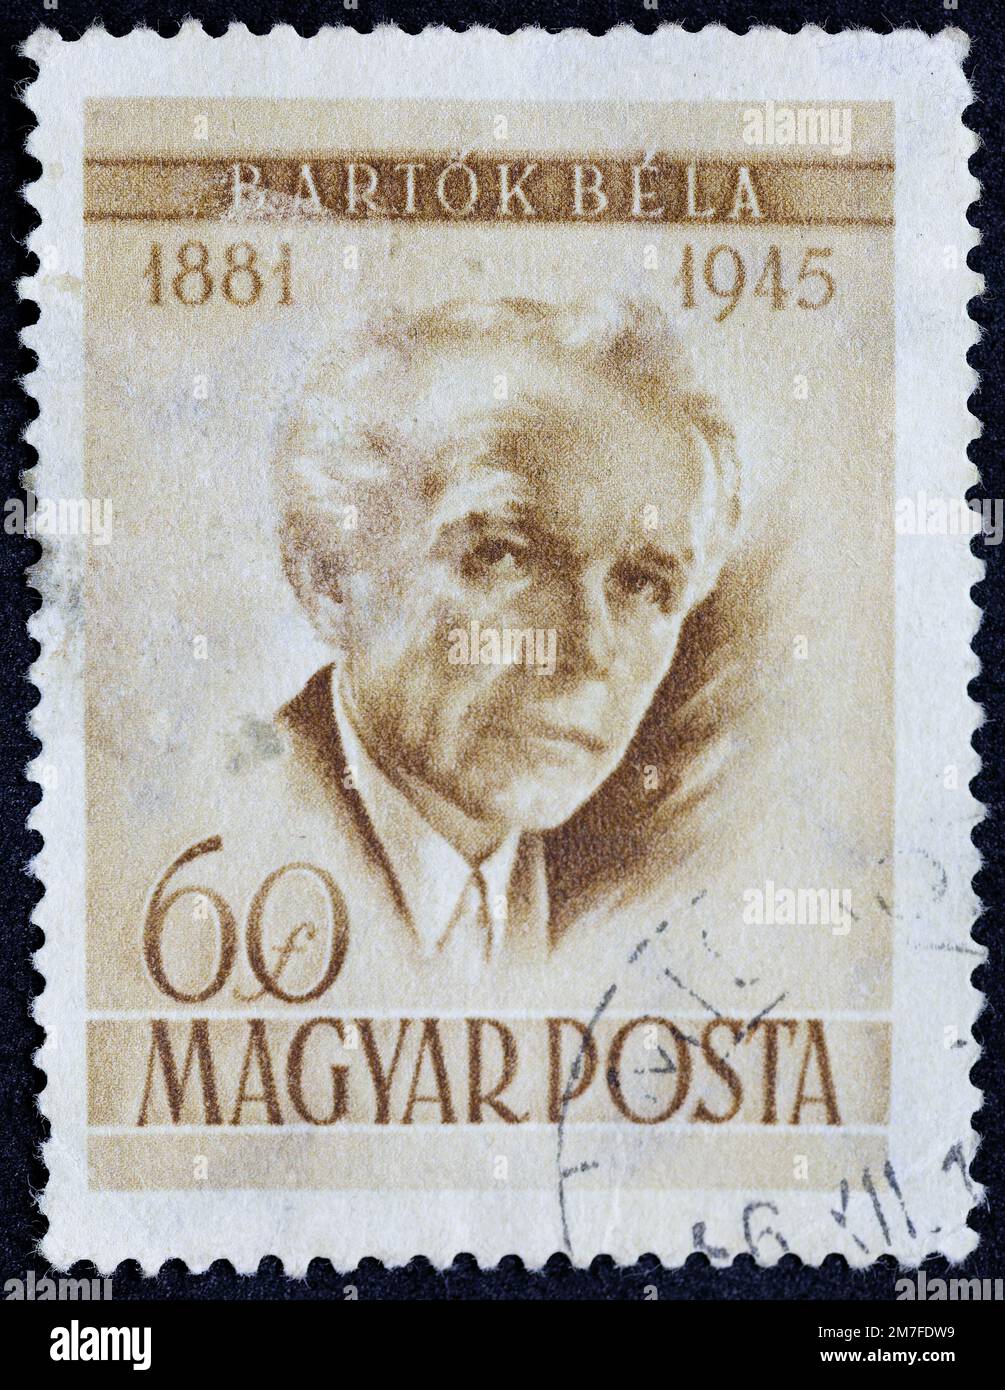 HUNGARY - CIRCA 1966: Postage stamp 60 forints printed in the Hungary shows Portrait of ethnomusicologist Bela Bartok 1881-1945. Post stamp series dev Stock Photo